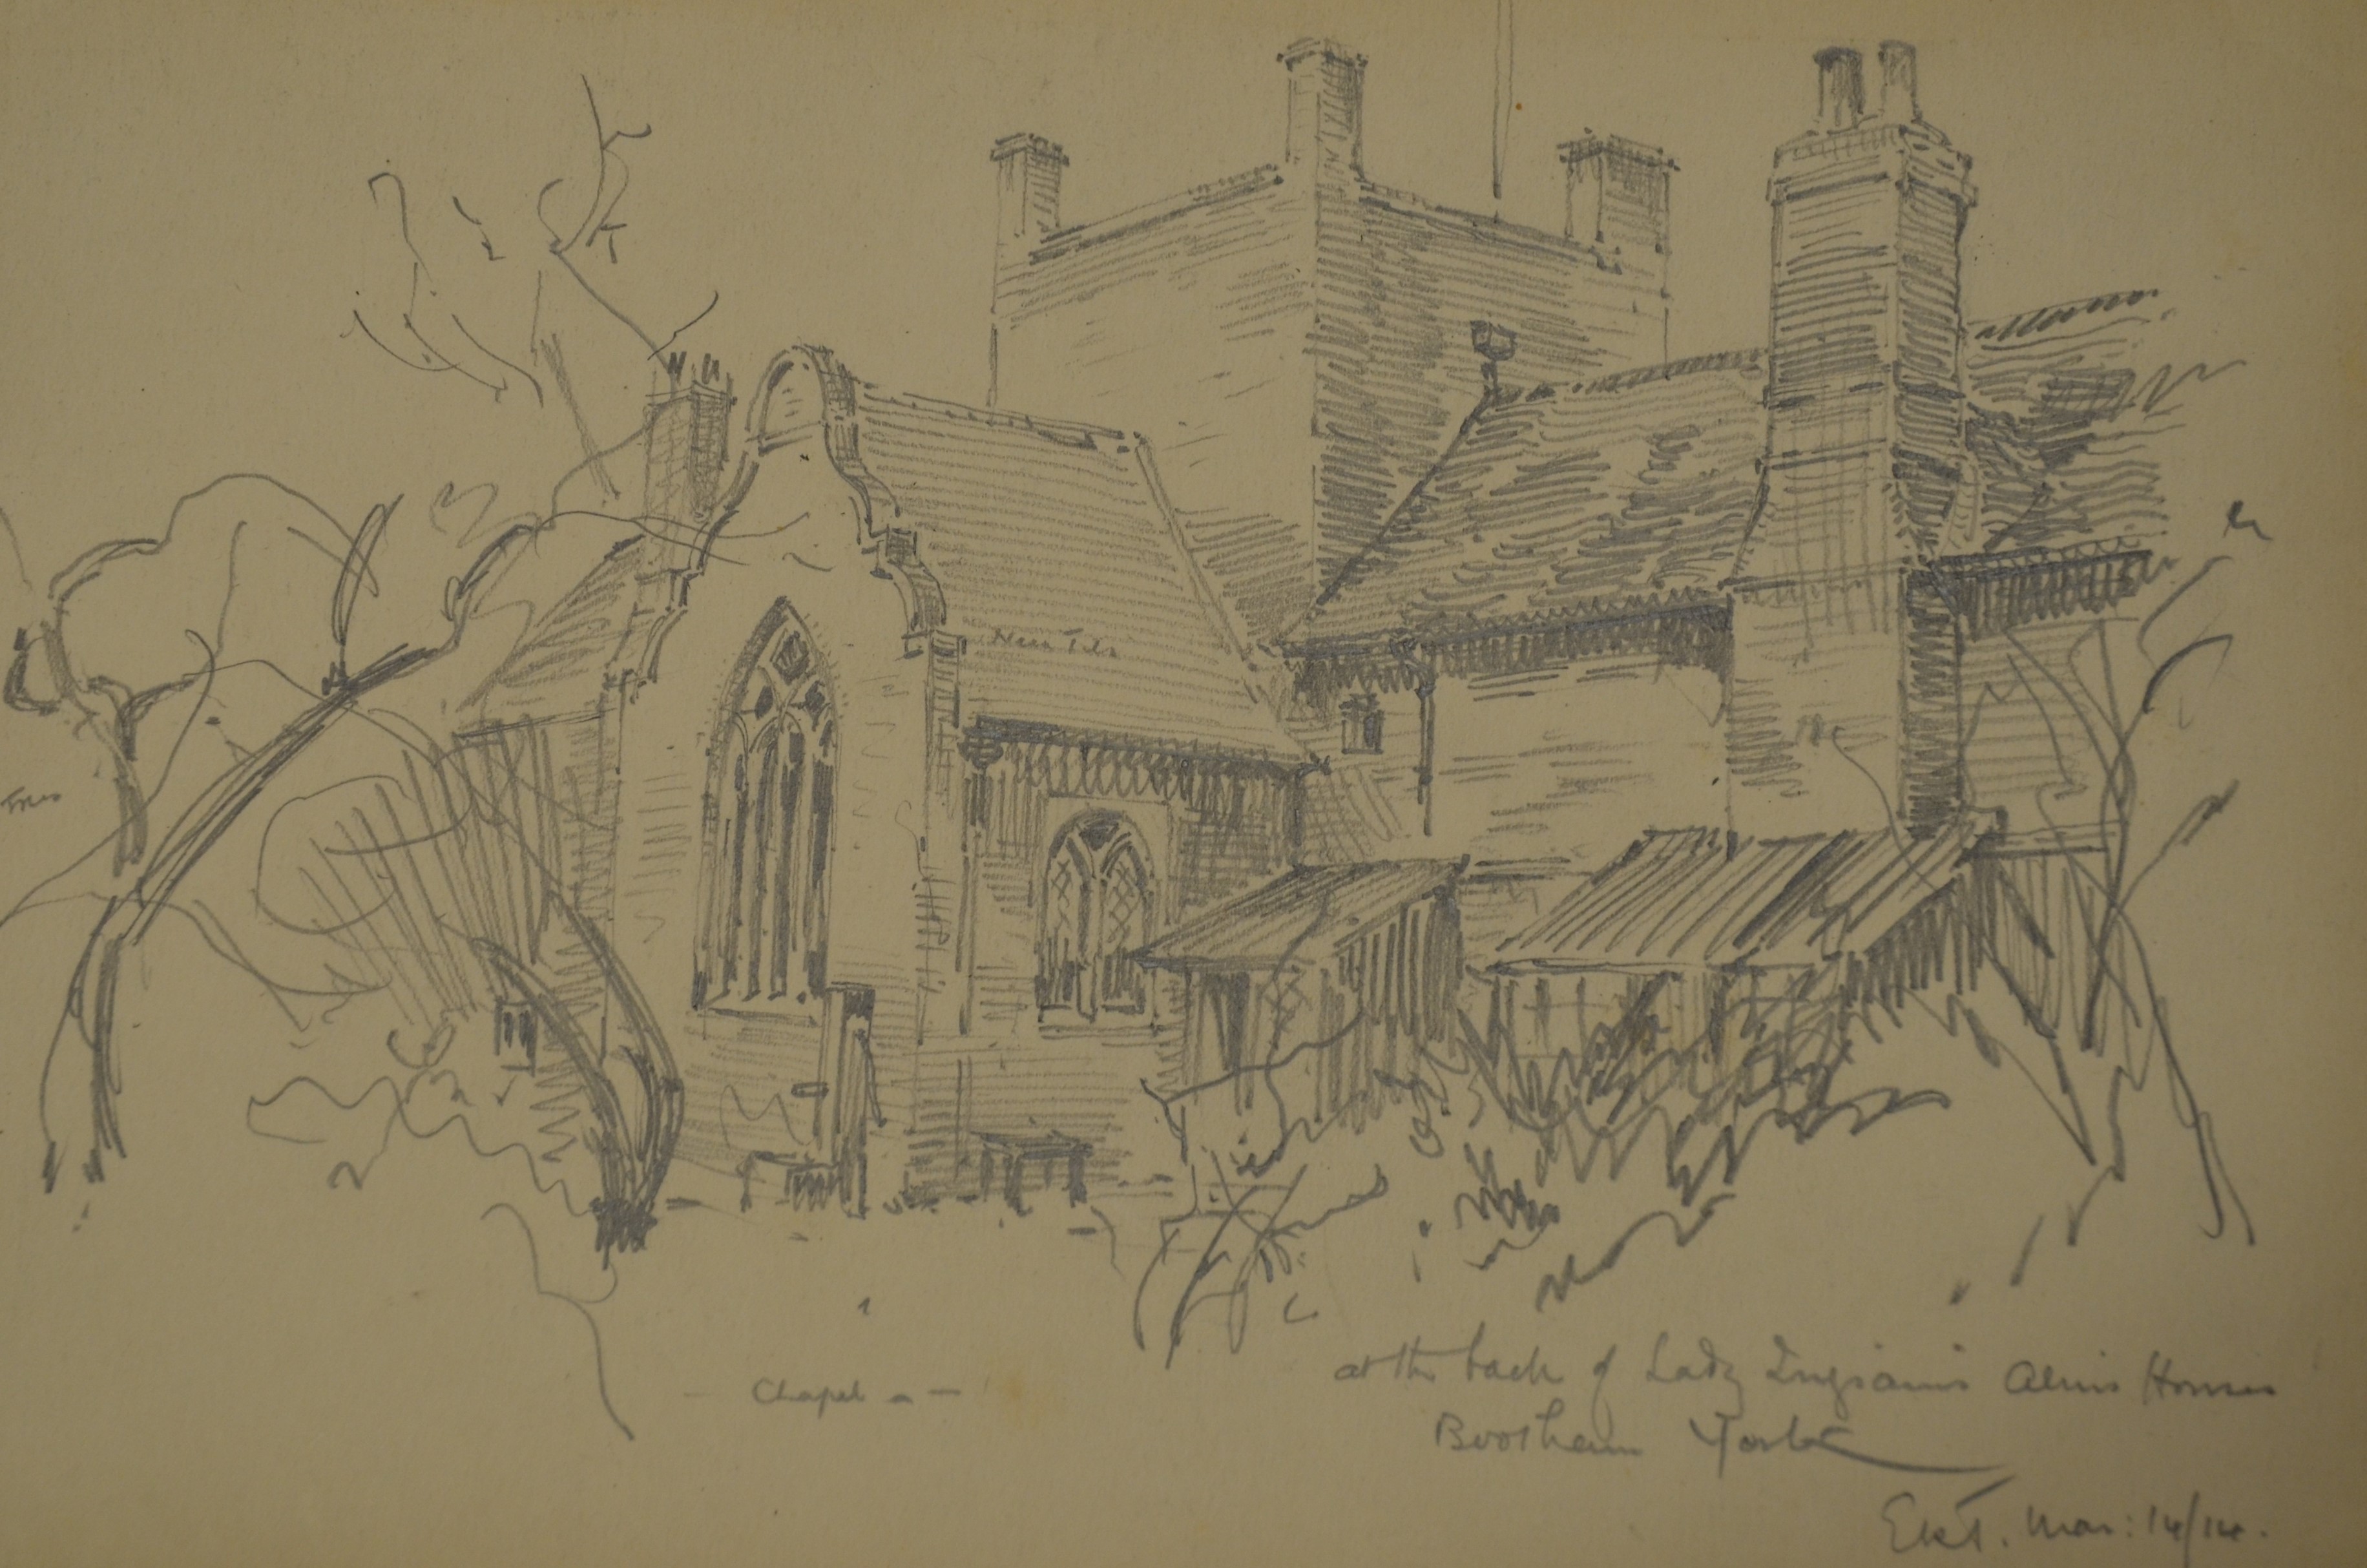 Ingram House | York Conservation Trust | Sketch by Ridsdale Tate